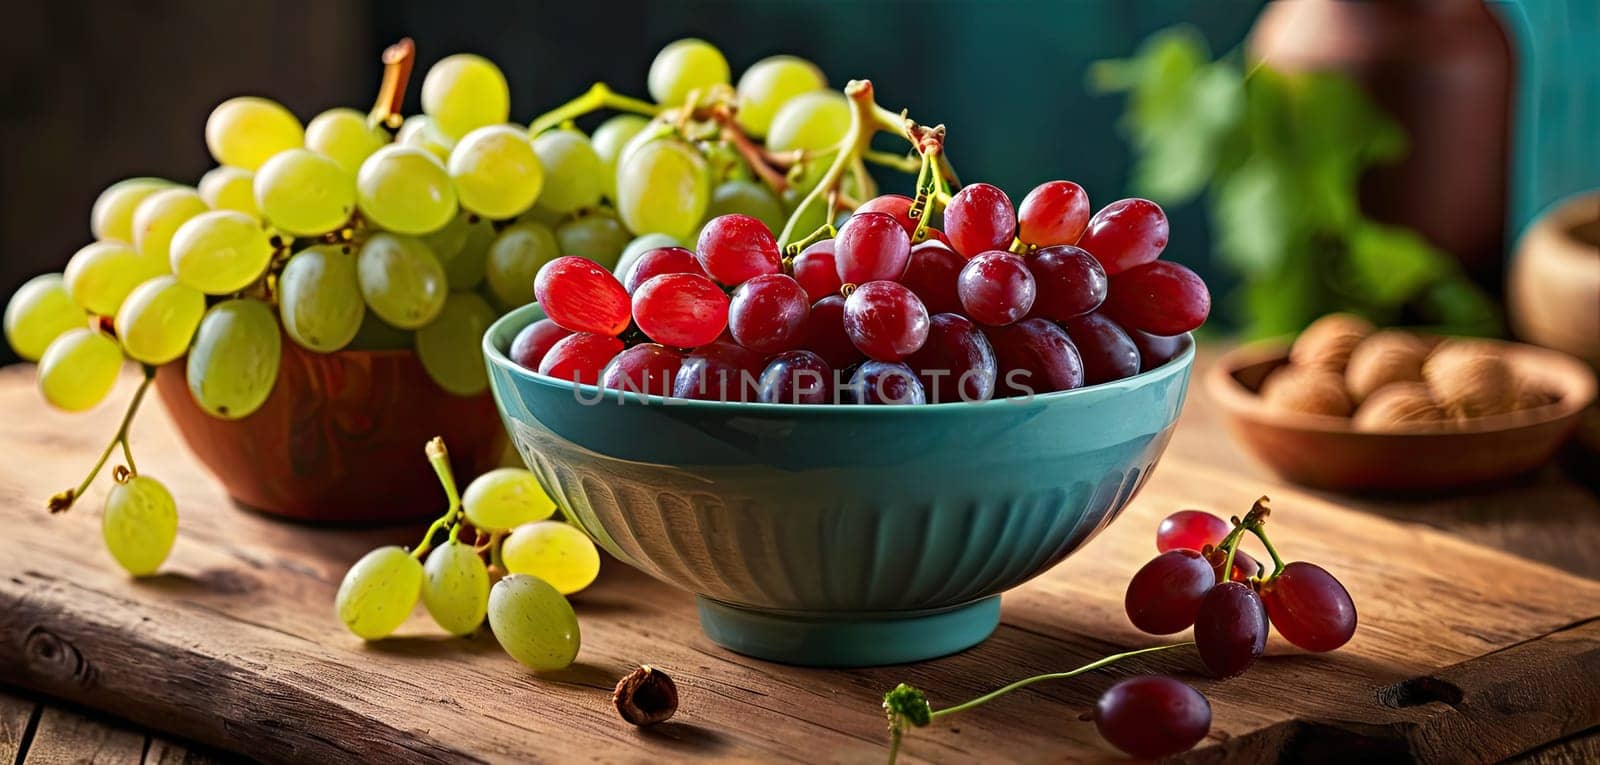 Grapes in bowl on wooden table